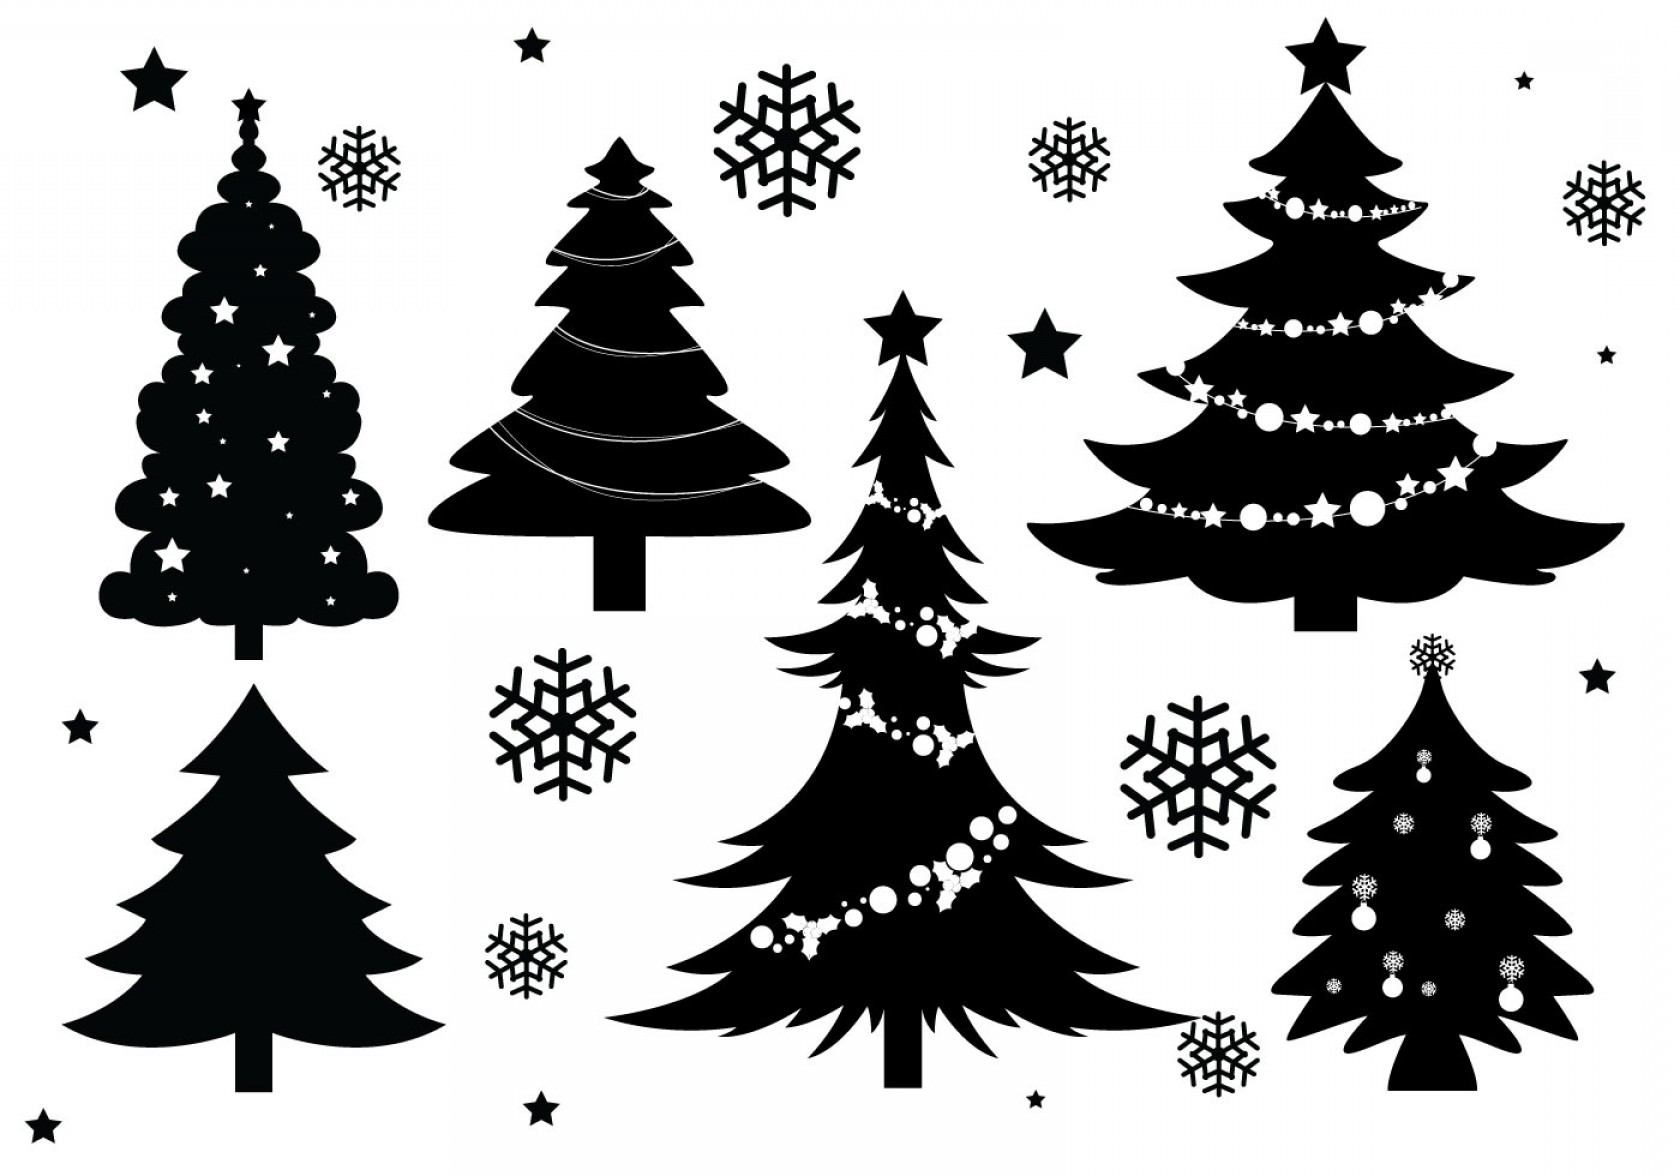 Download Fir Tree Silhouette Vector at Vectorified.com | Collection of Fir Tree Silhouette Vector free ...